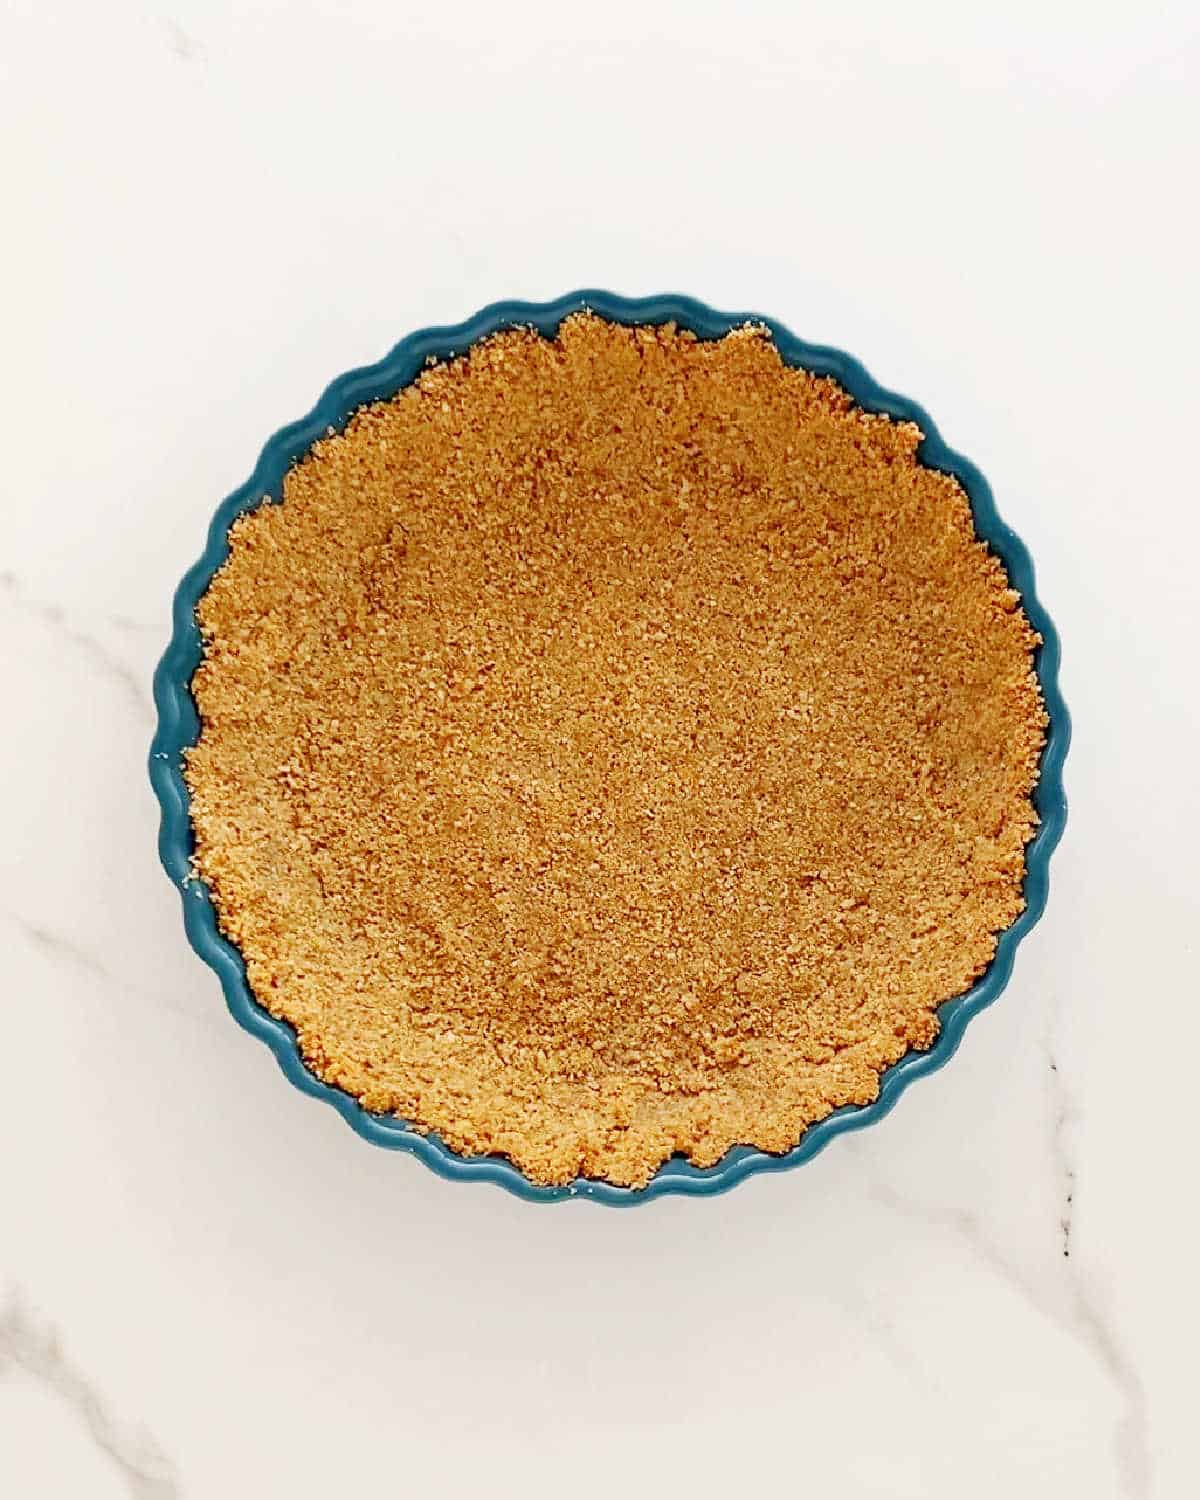 Teal pie dish with graham cracker crust on a white marbled surface.